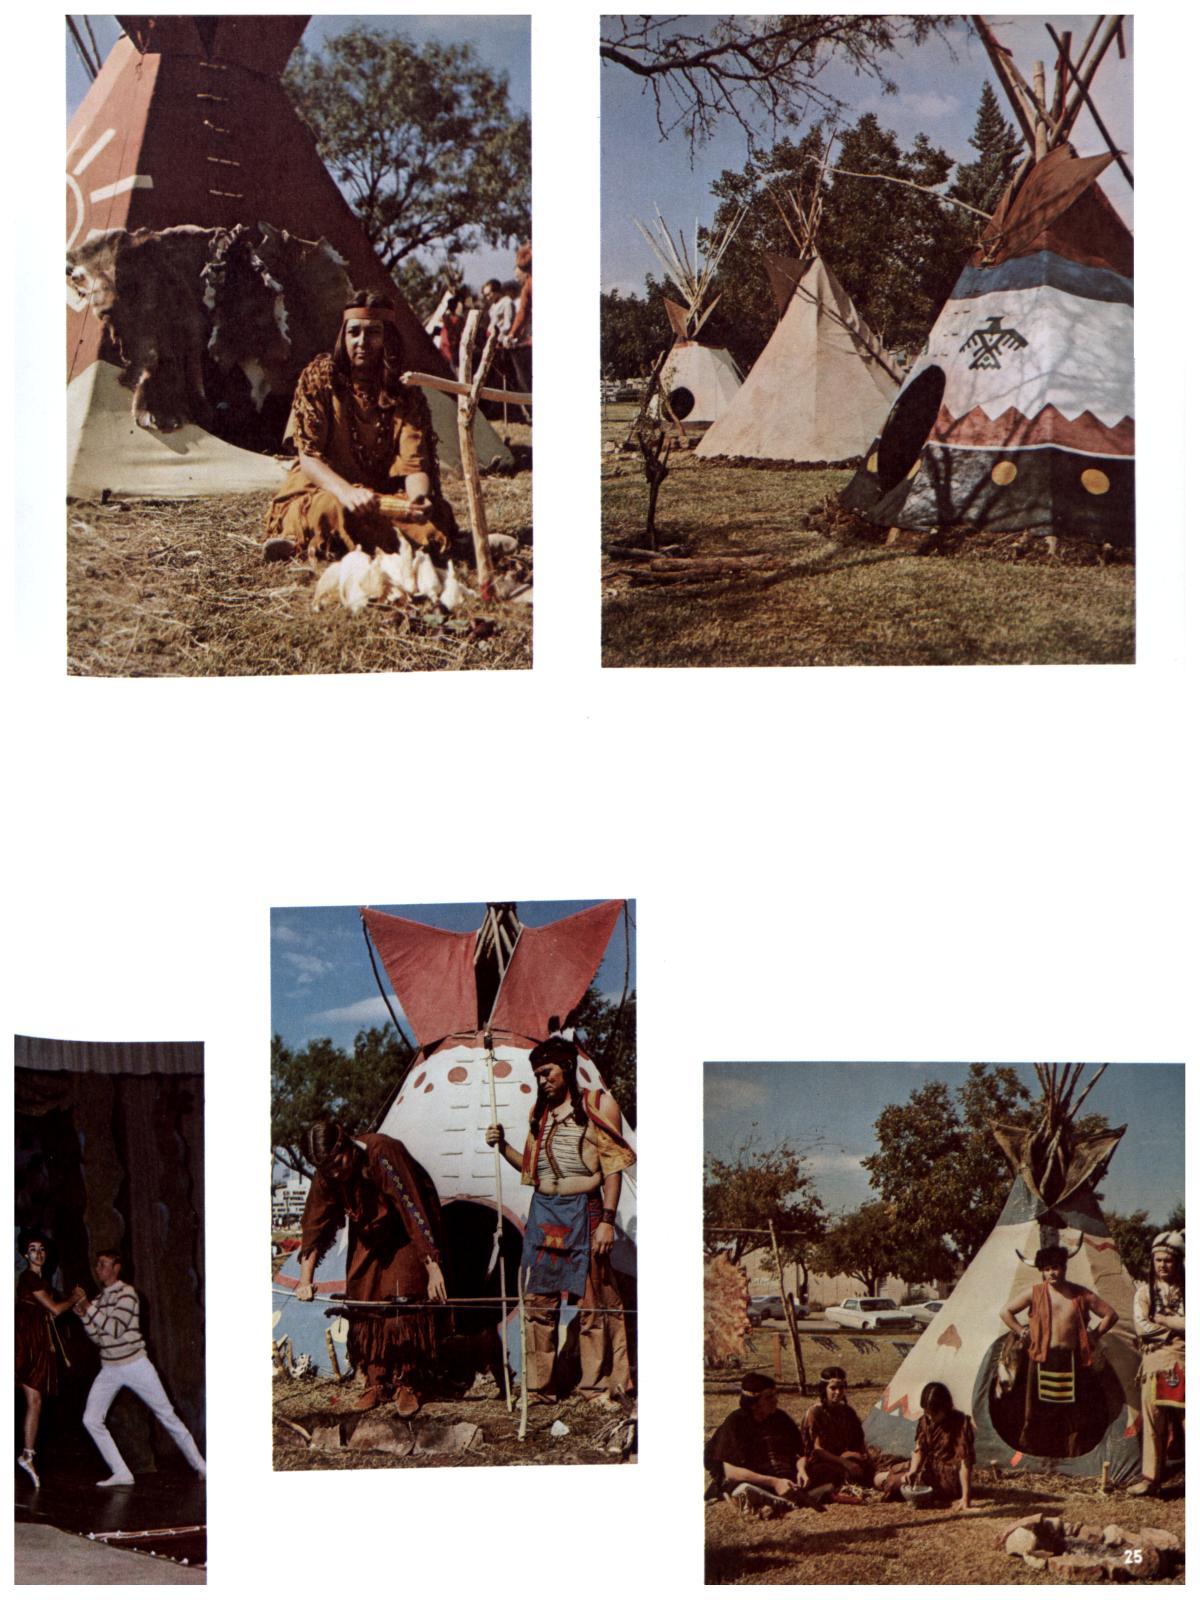 The Totem, Yearbook of McMurry College, 1970
                                                
                                                    25
                                                